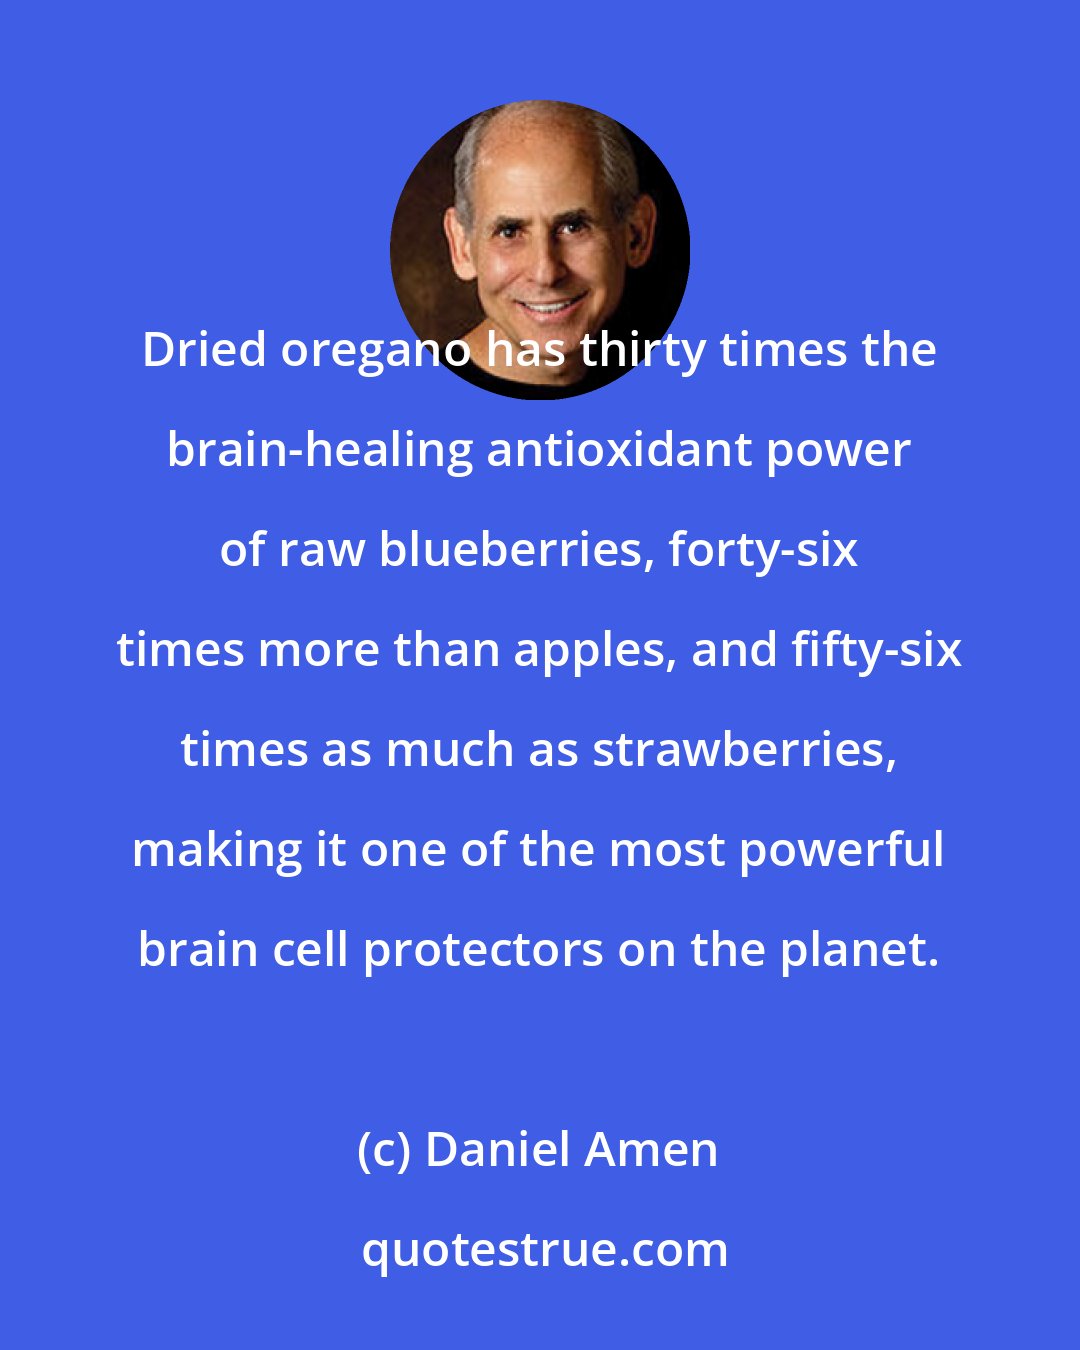 Daniel Amen: Dried oregano has thirty times the brain-healing antioxidant power of raw blueberries, forty-six times more than apples, and fifty-six times as much as strawberries, making it one of the most powerful brain cell protectors on the planet.